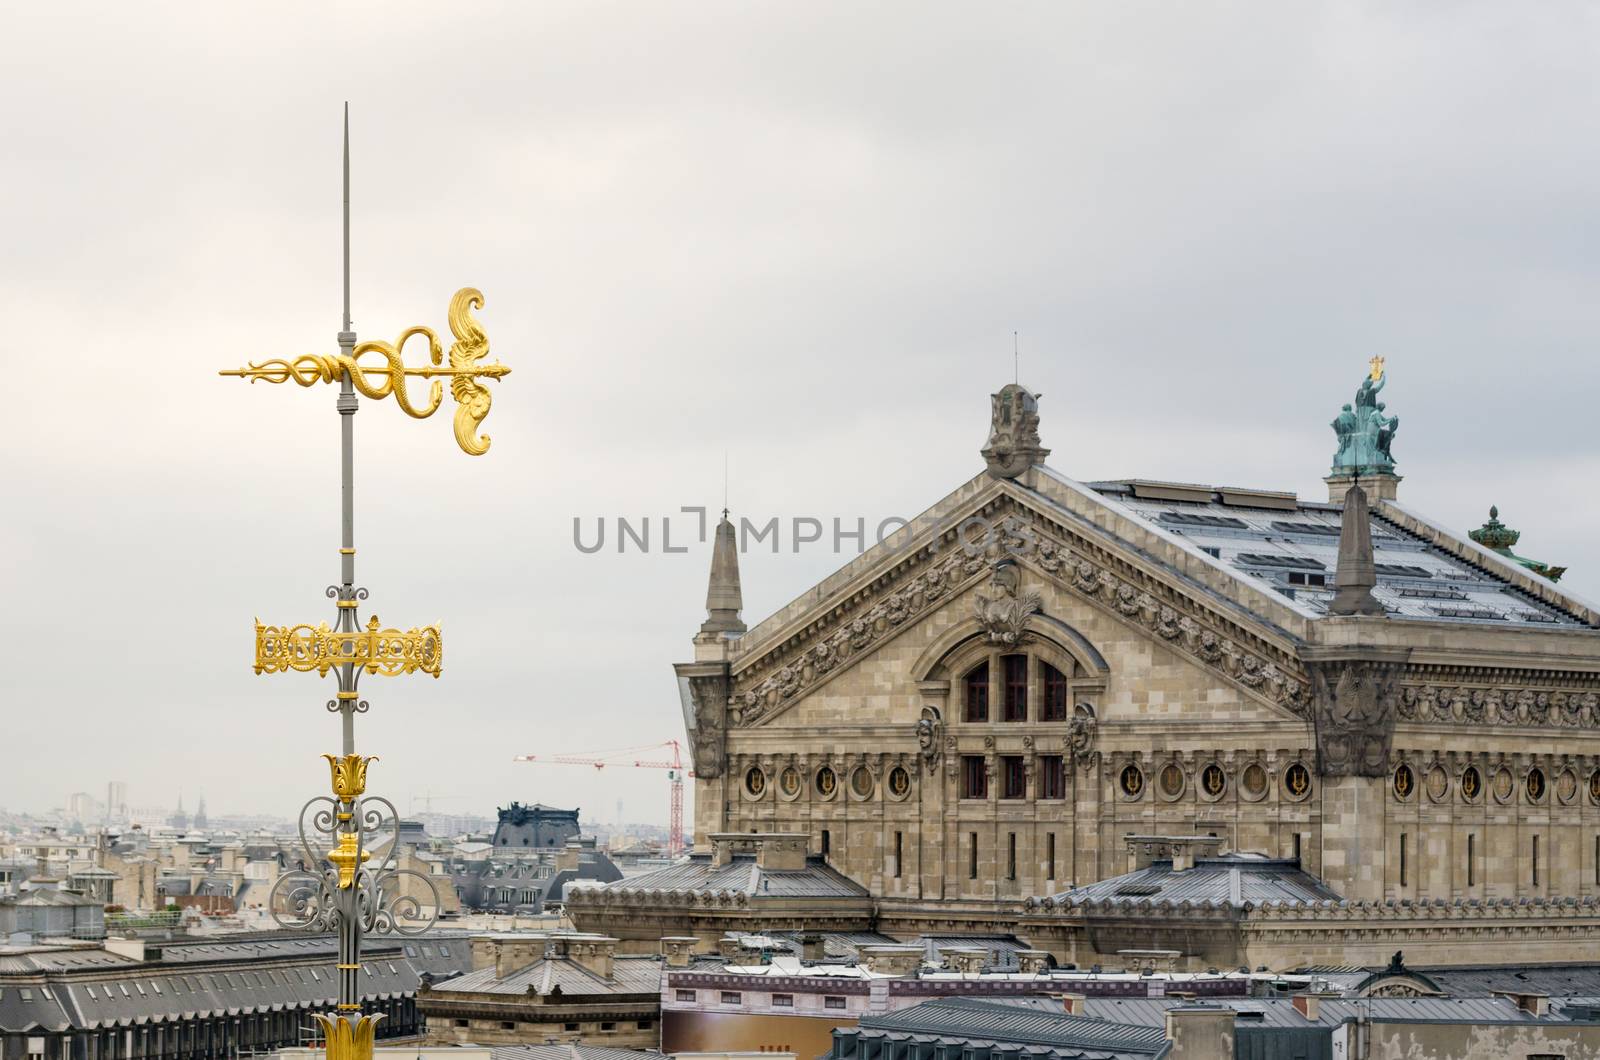 Snakes and arrow Roof Decorated with Opera House (Palais Garnier) in Paris, France